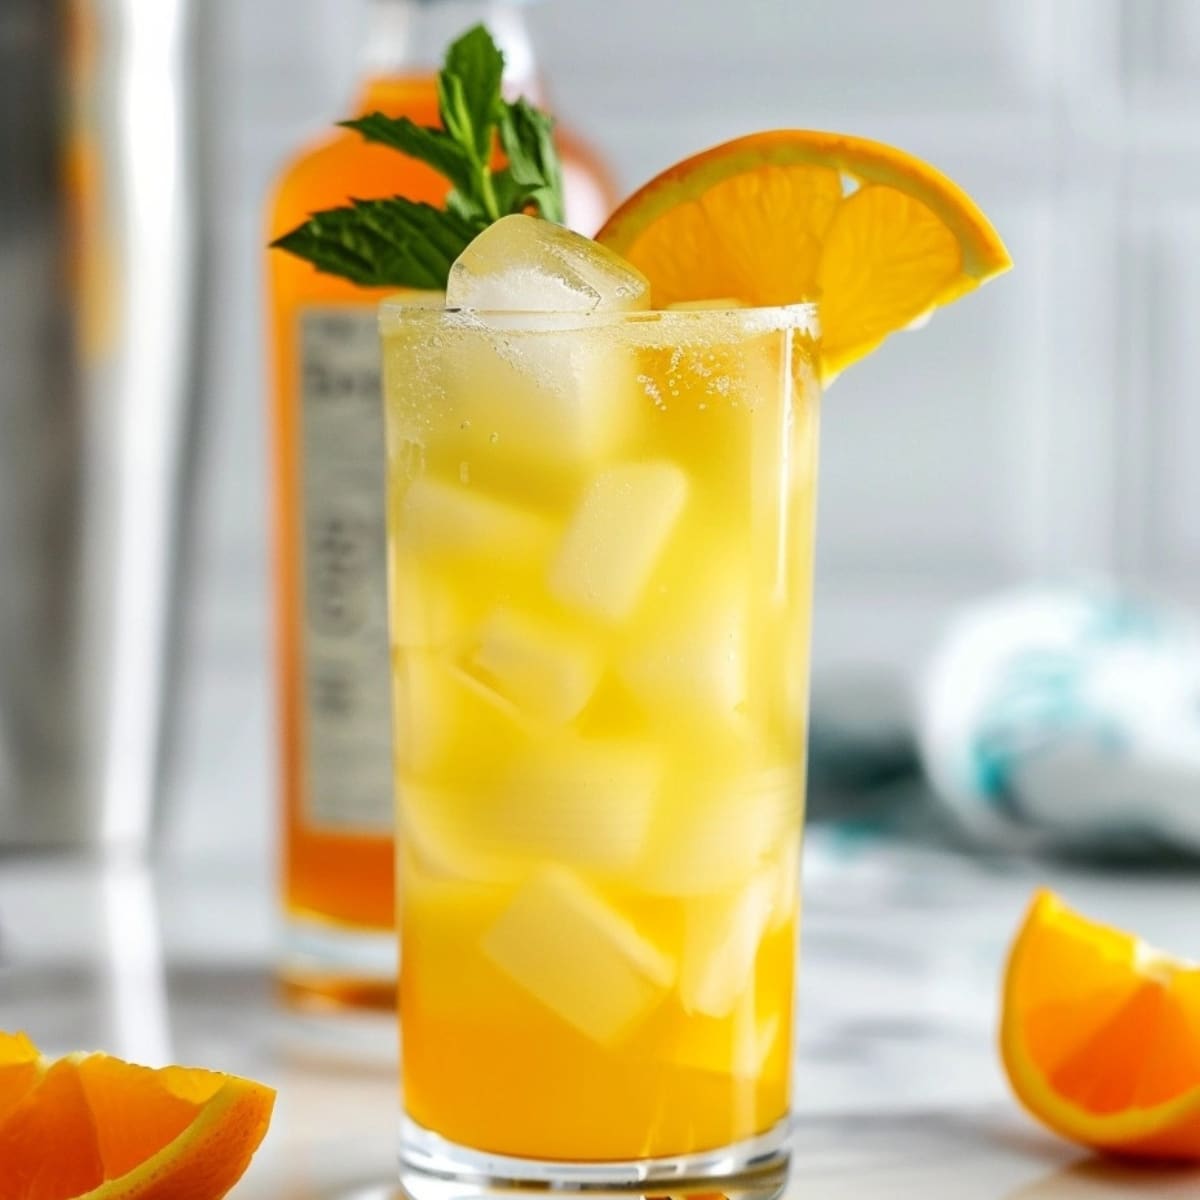 Orange crush cocktail in a high ball glass filled with ice.